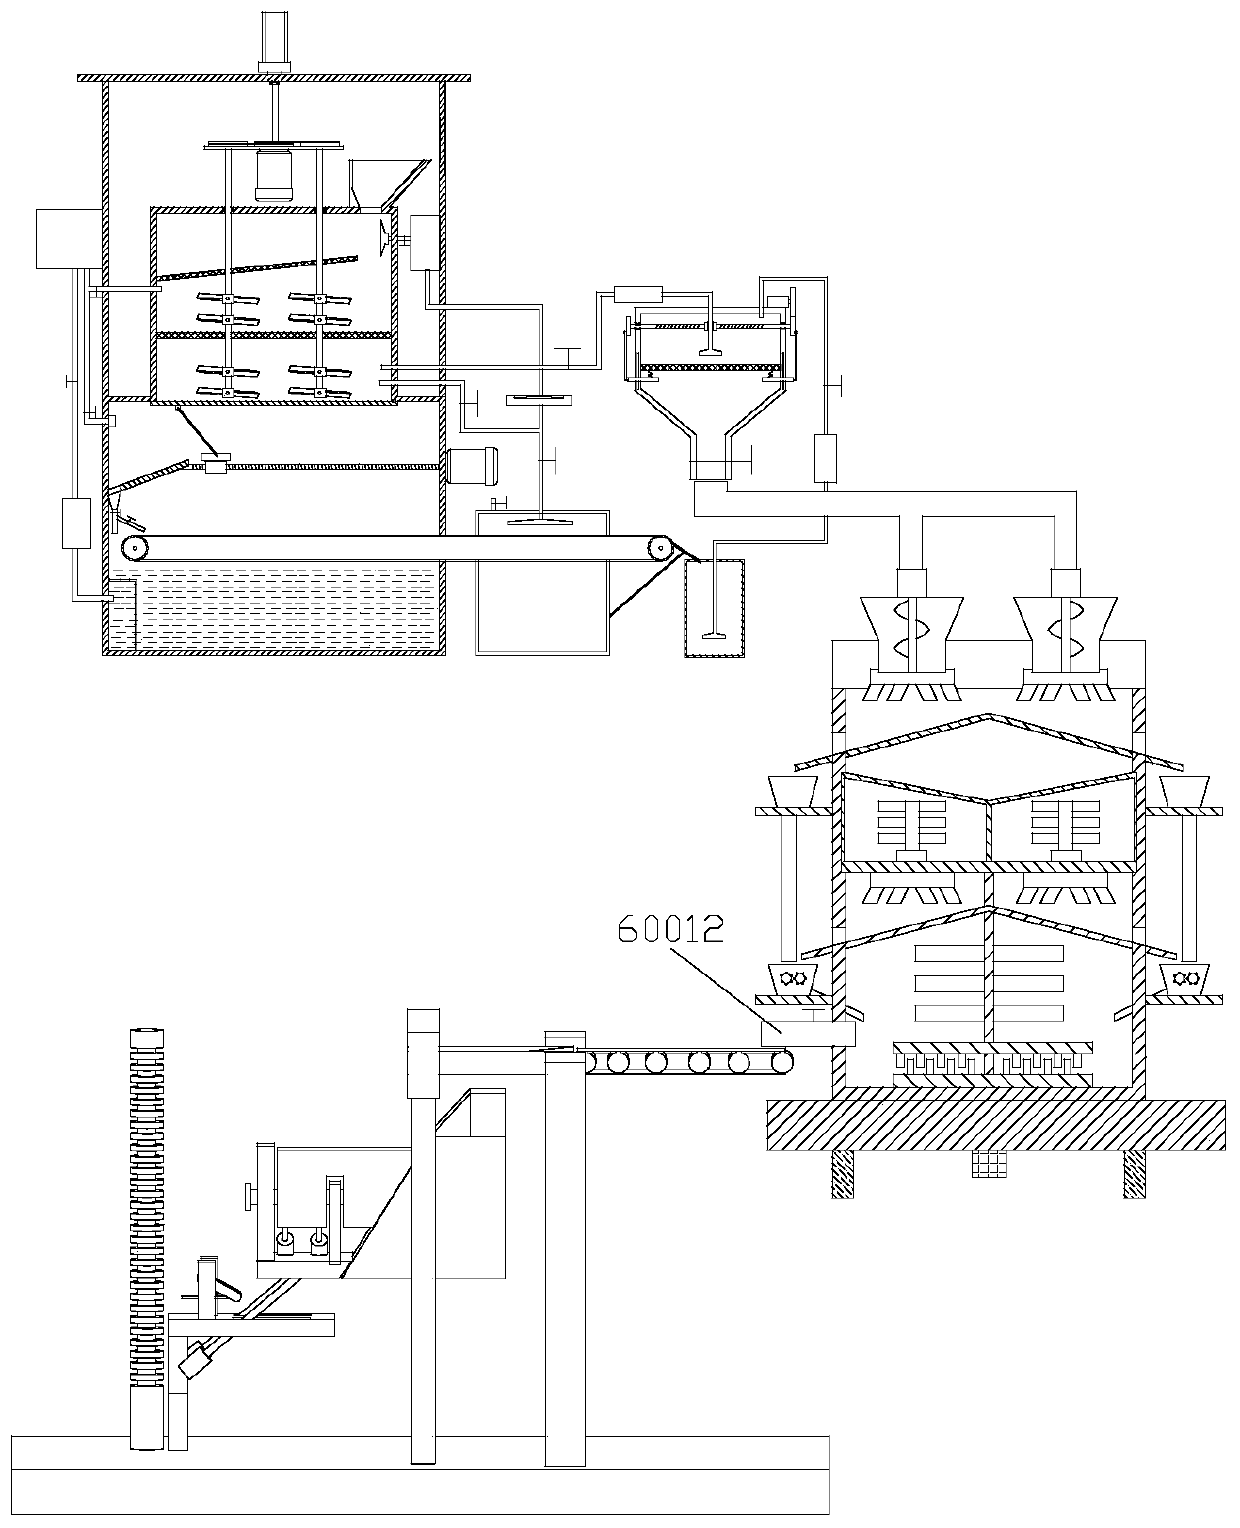 A cornmeal production and processing mechanism based on multi-directional feeding